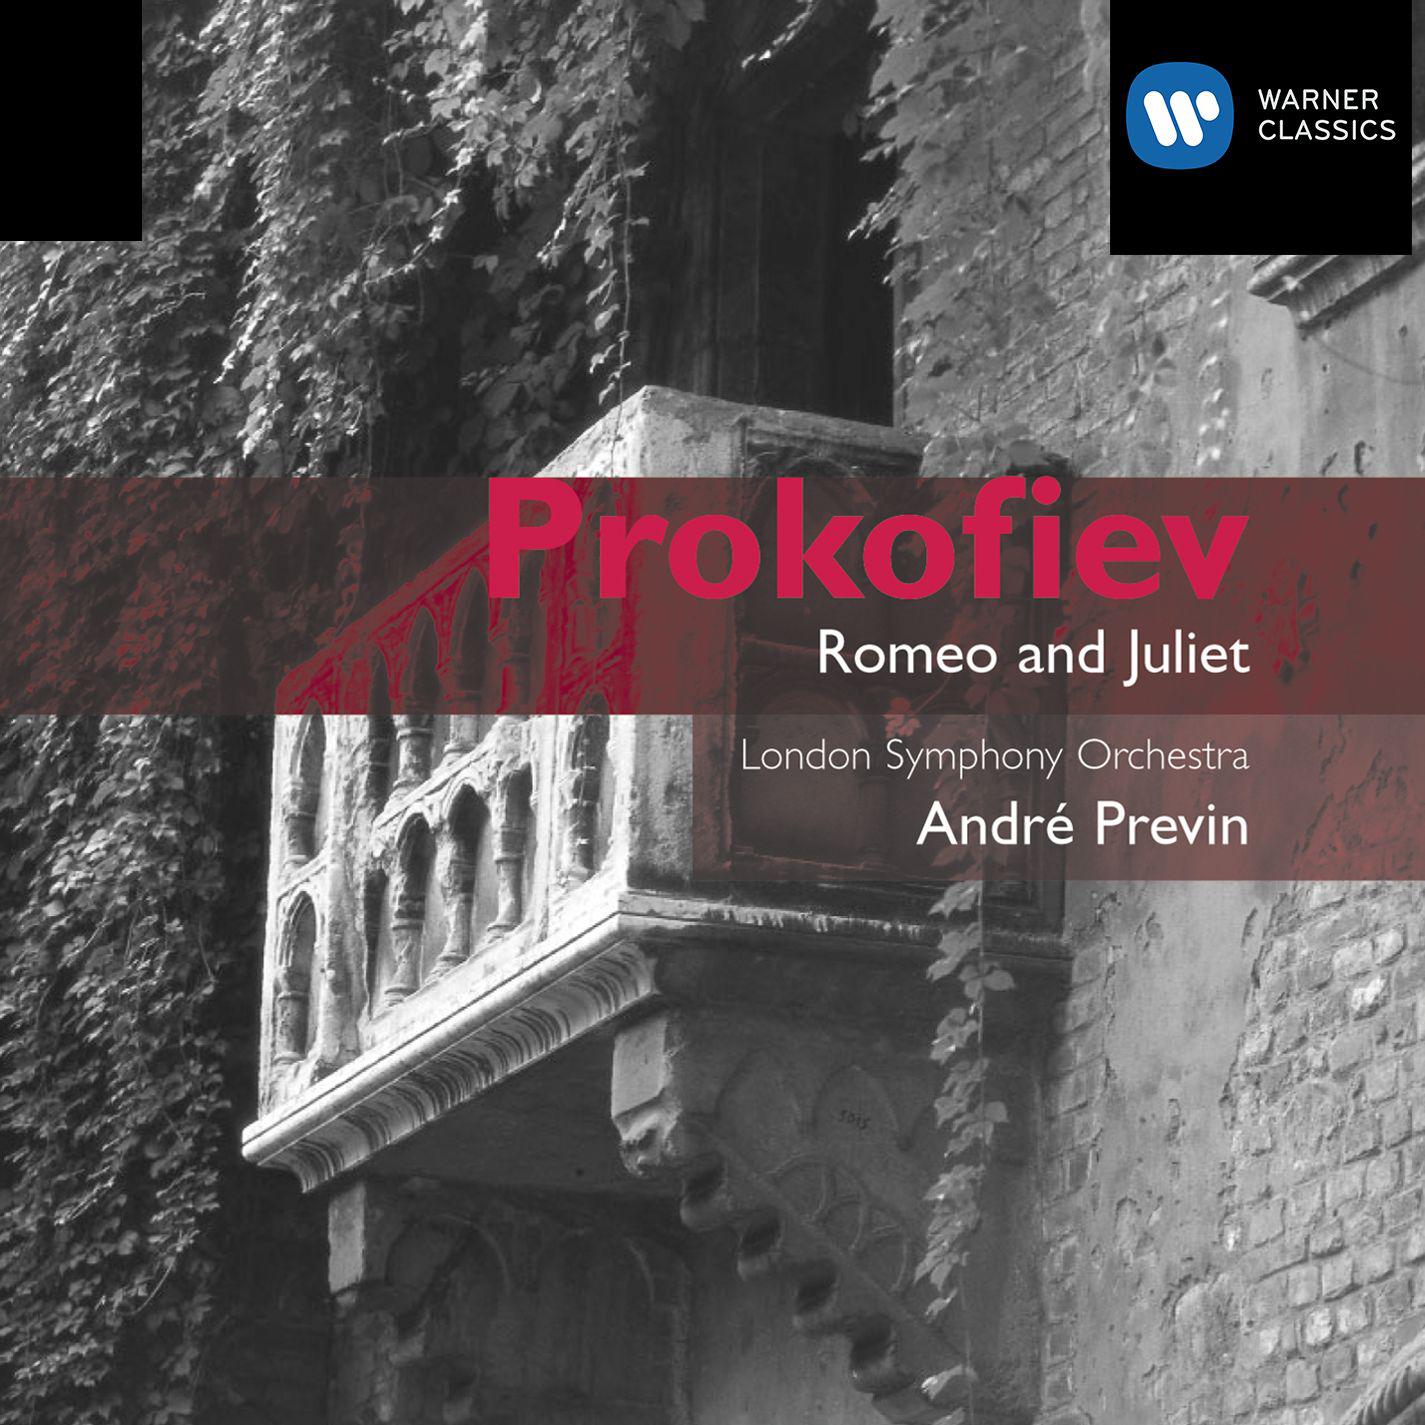 Romeo and Juliet (Complete Ballet), Op. 64, Act 3:No. 49, Dance of the Girls with the Lilies